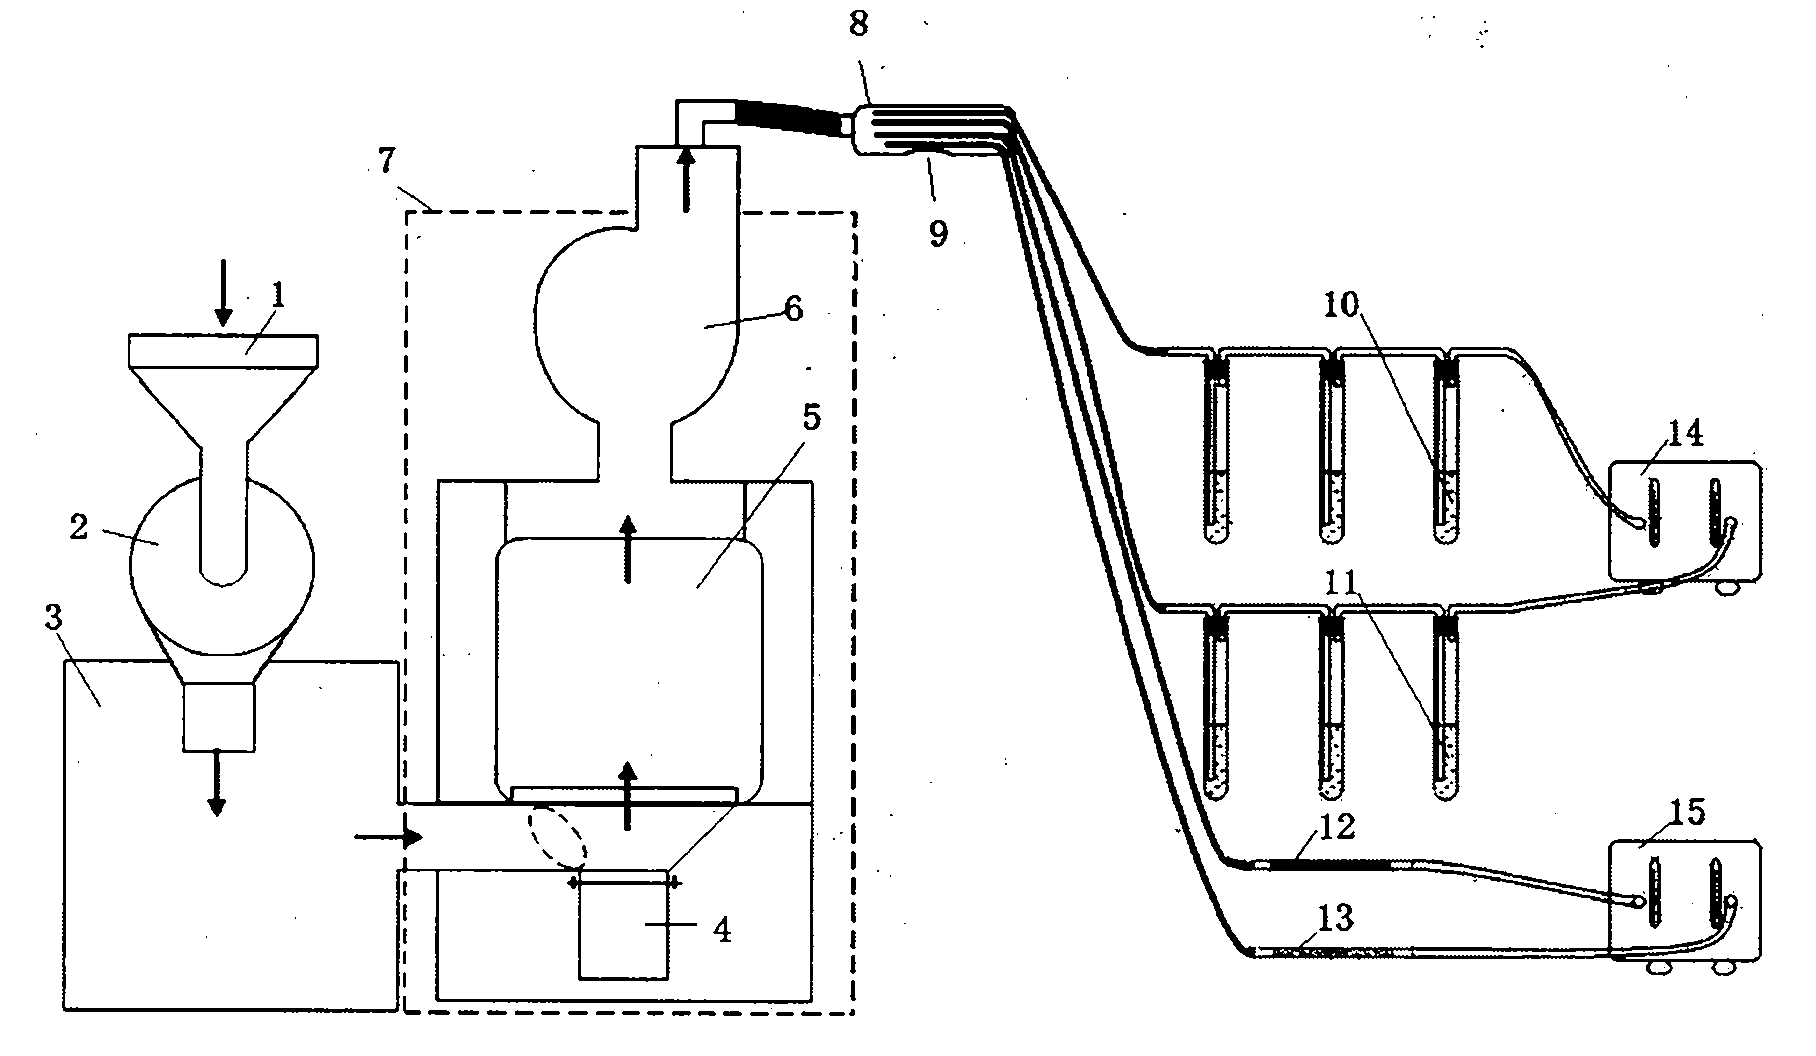 Sampling device of gaseous contaminant in material crushing process